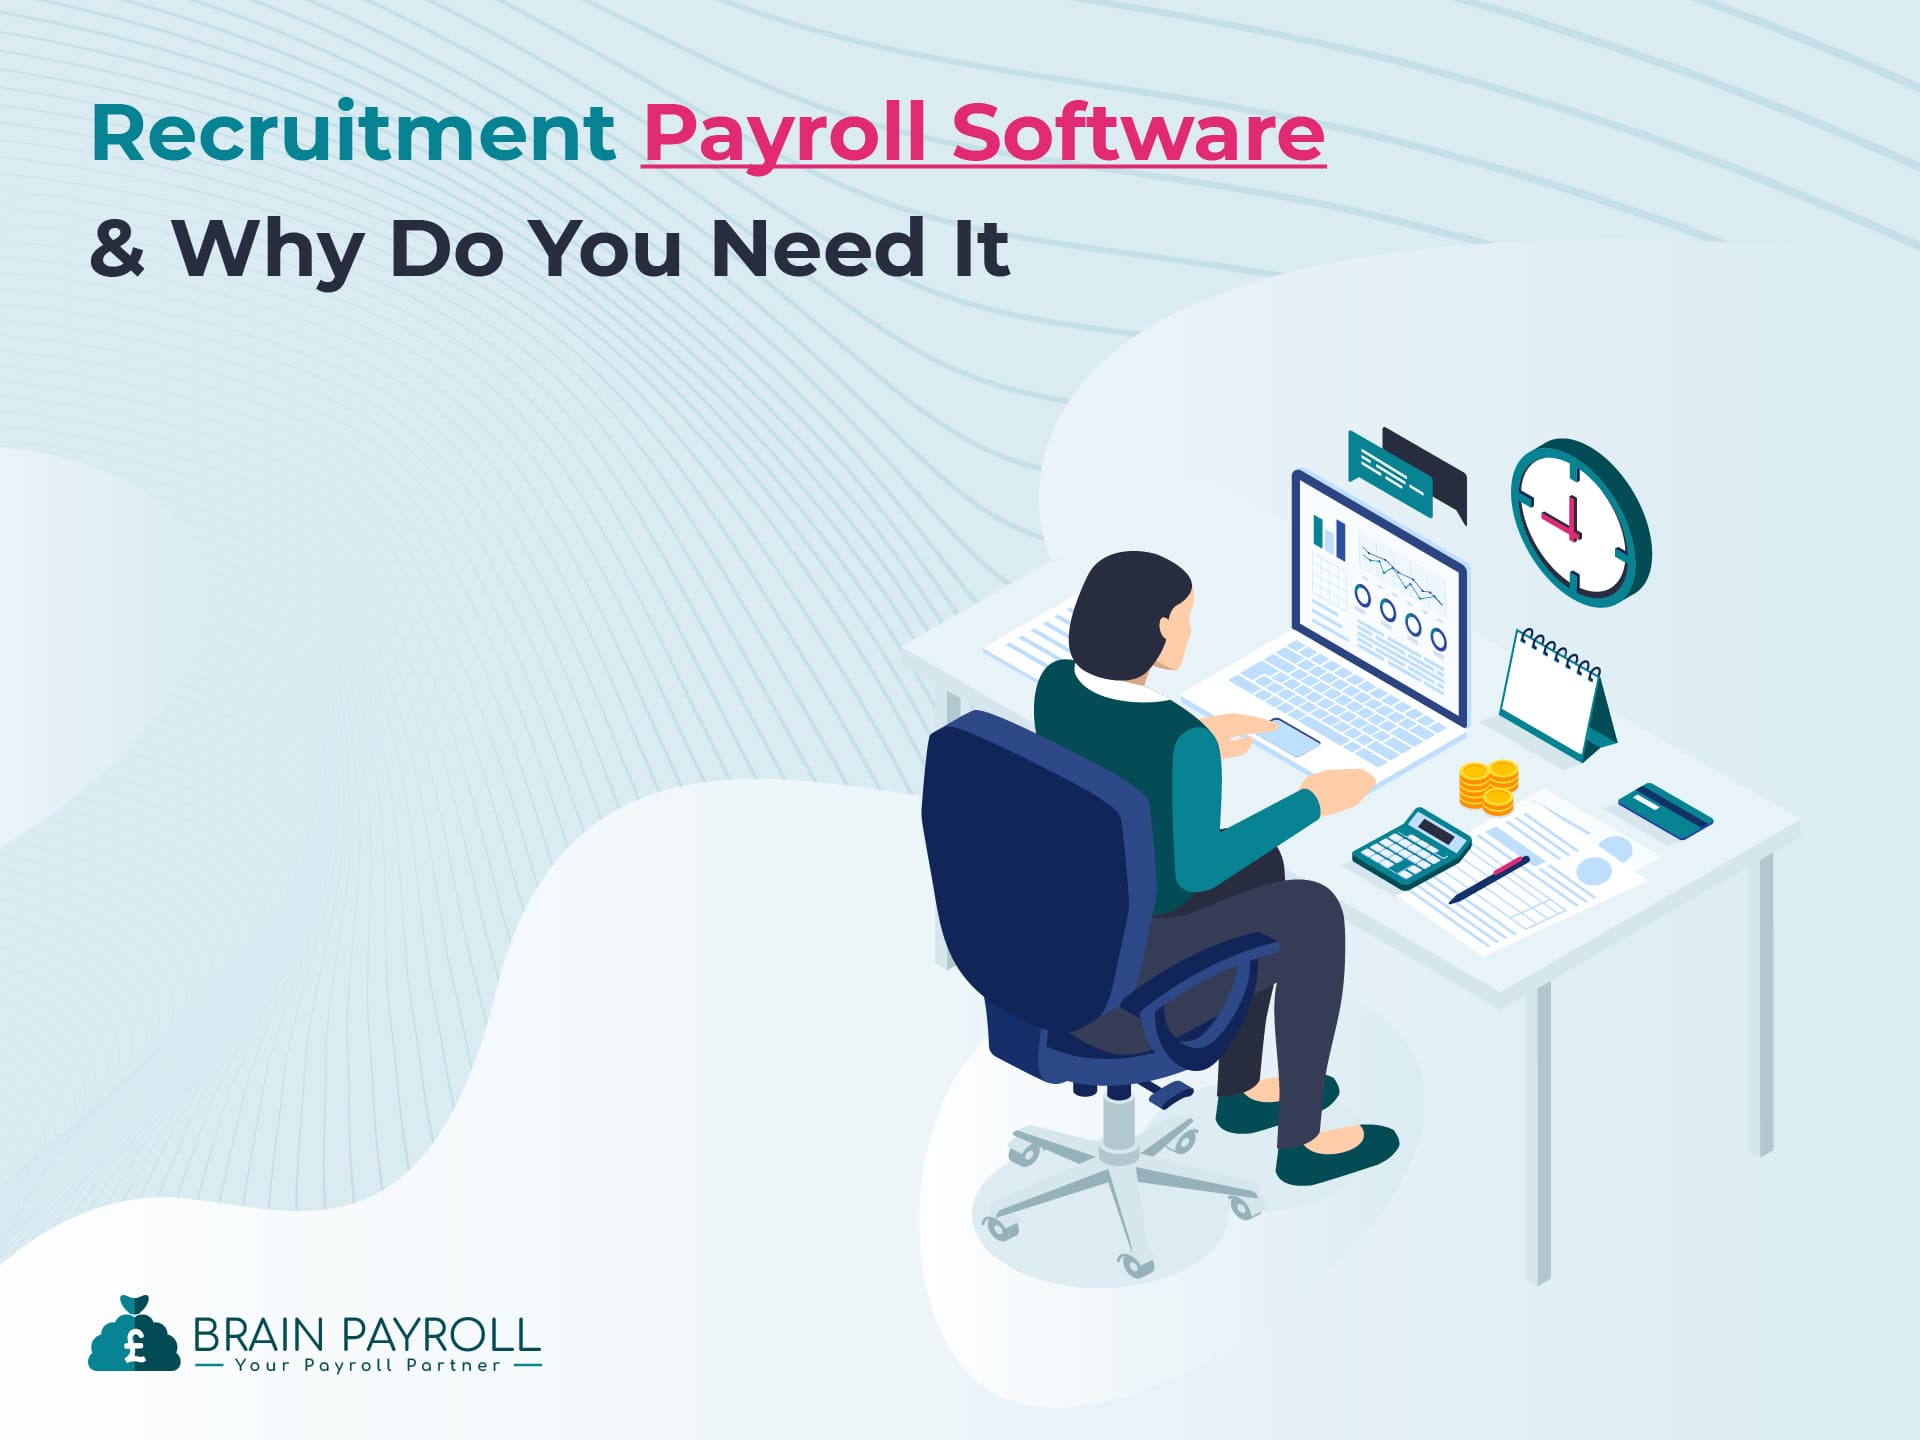 What Is Recruitment Payroll Software and Why Do You Need It